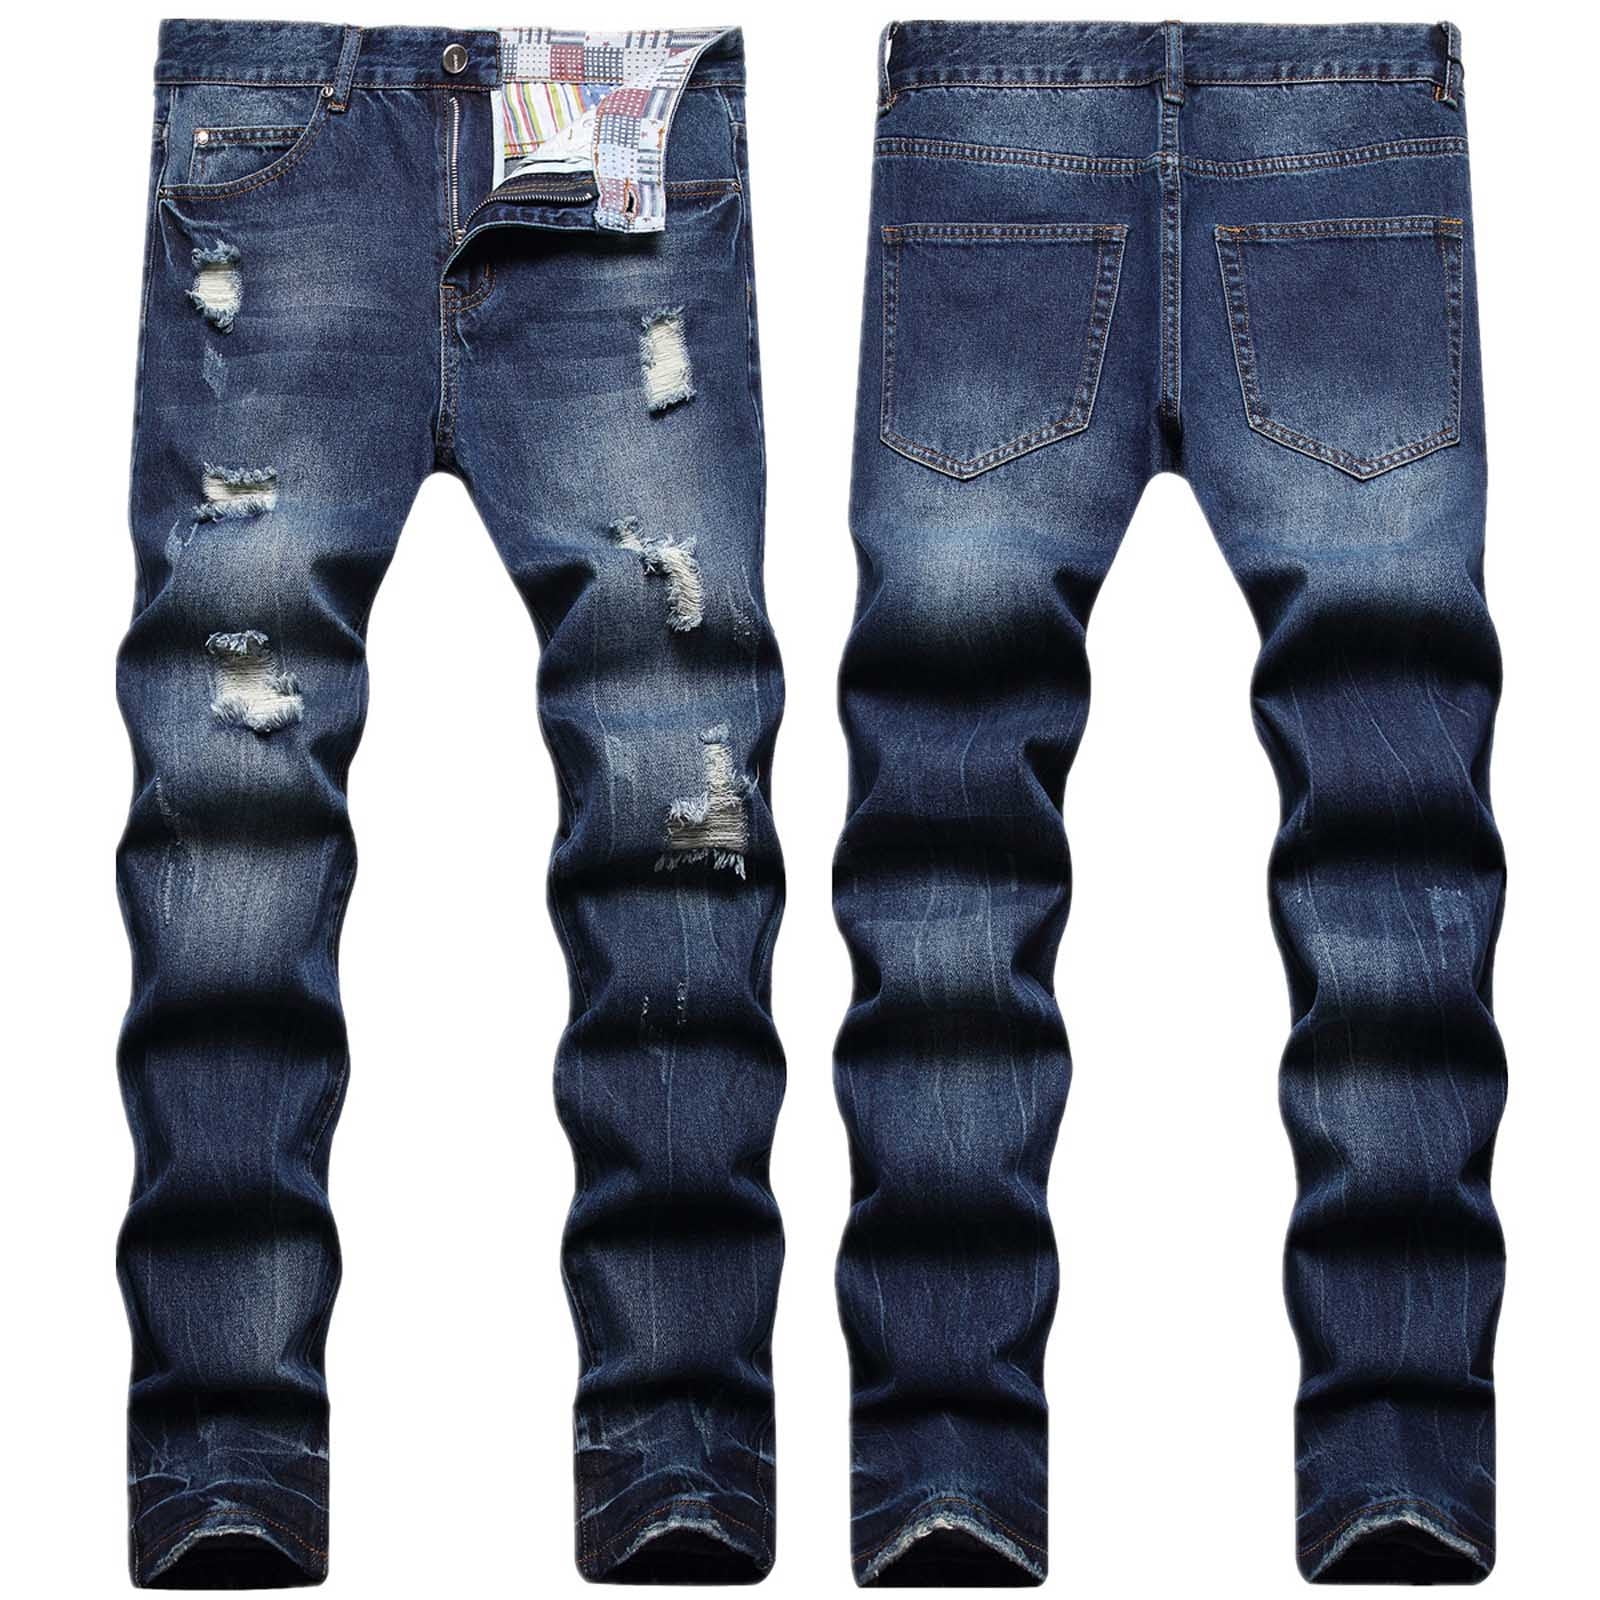 HAOTAGS Classic Relaxed Fit Jeans for Men Fashion Comfort Denim Pants ...